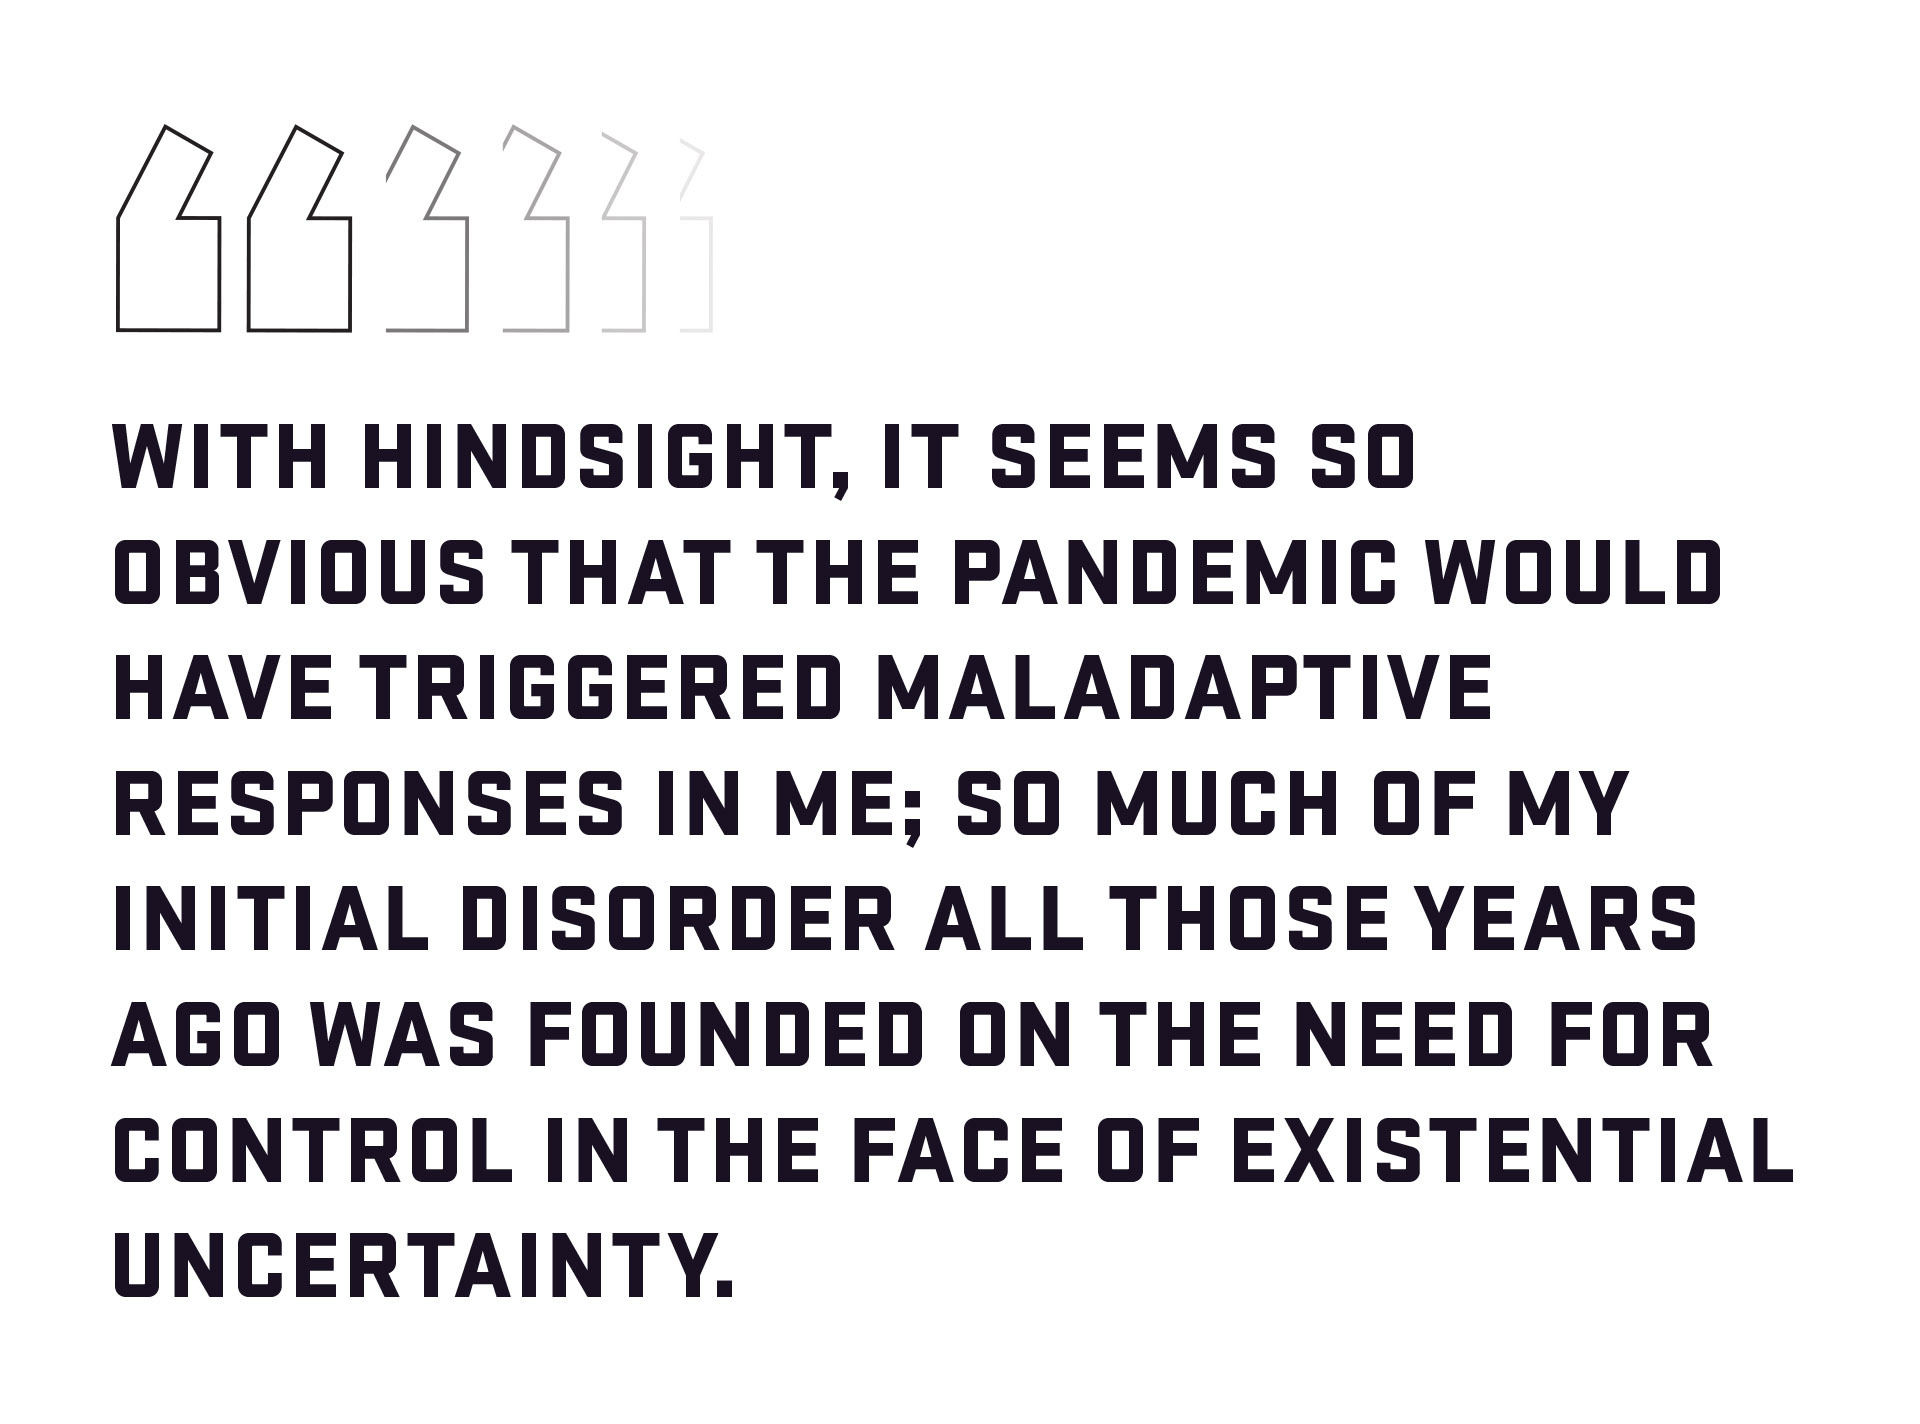 Block quote: With hindsight, it seems so obvious that the pandemic would have triggered maladaptive responses in me; so much of my initial disorder all those years ago was founded on the need for control in the face of existential uncertainty. 